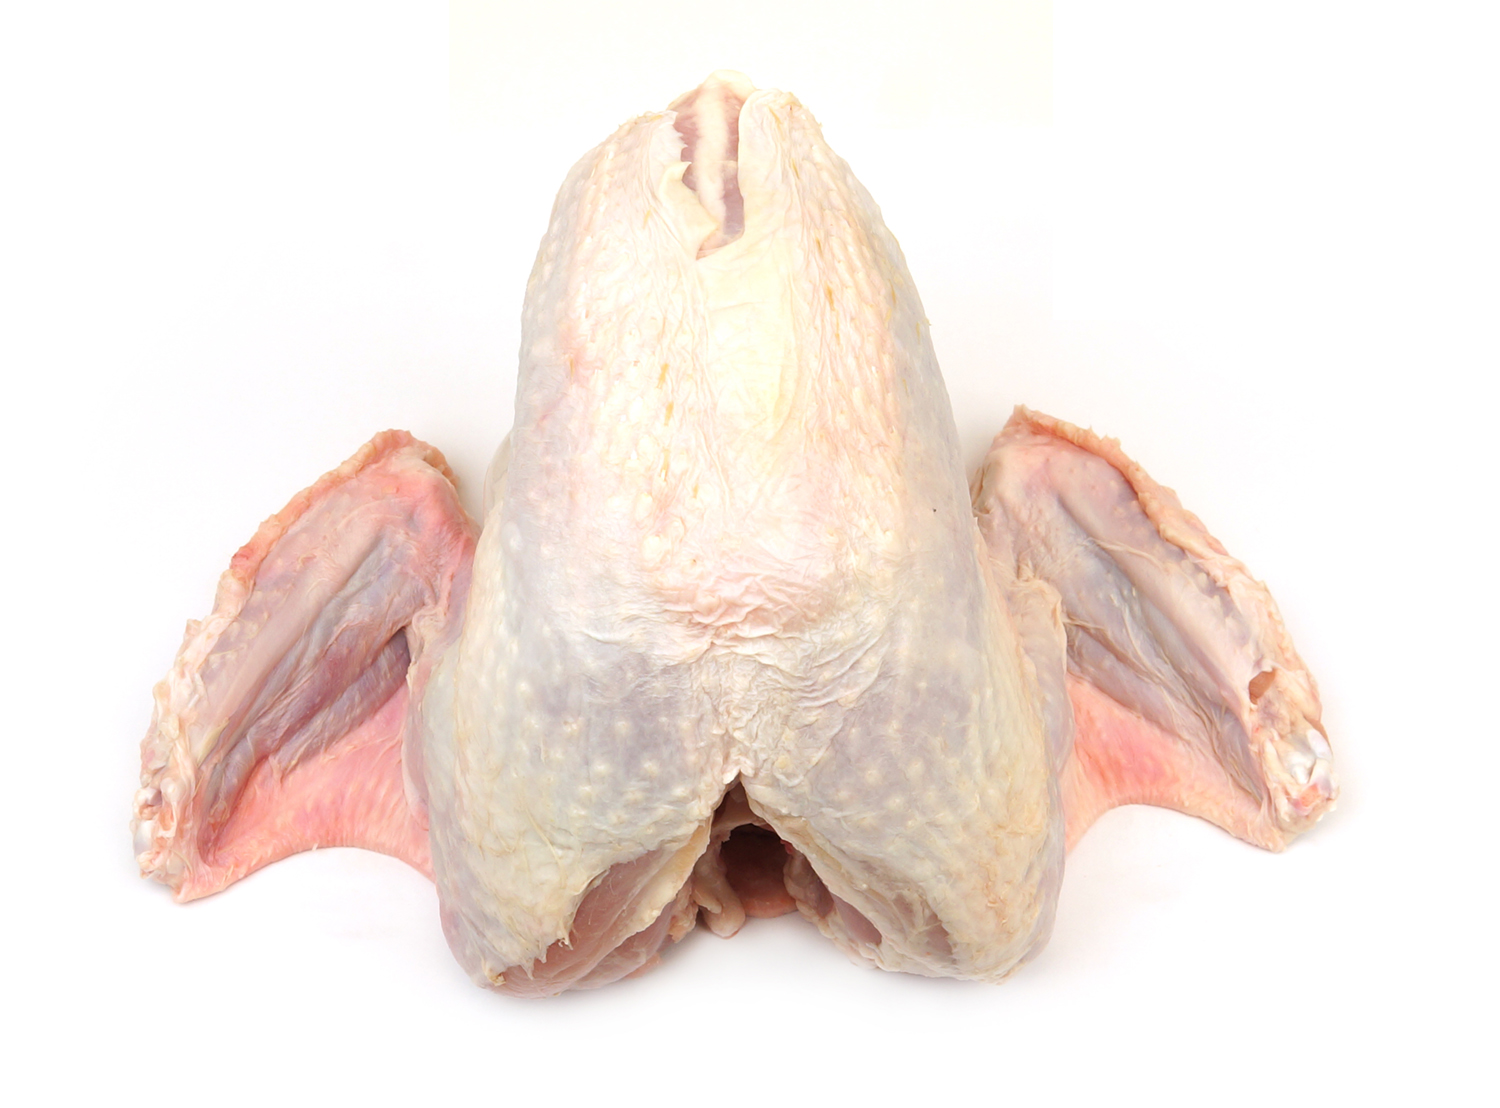  Wise Organic Pastures Chicken Whole Broilers Cryovaced, 3.5 lb  : Grocery & Gourmet Food